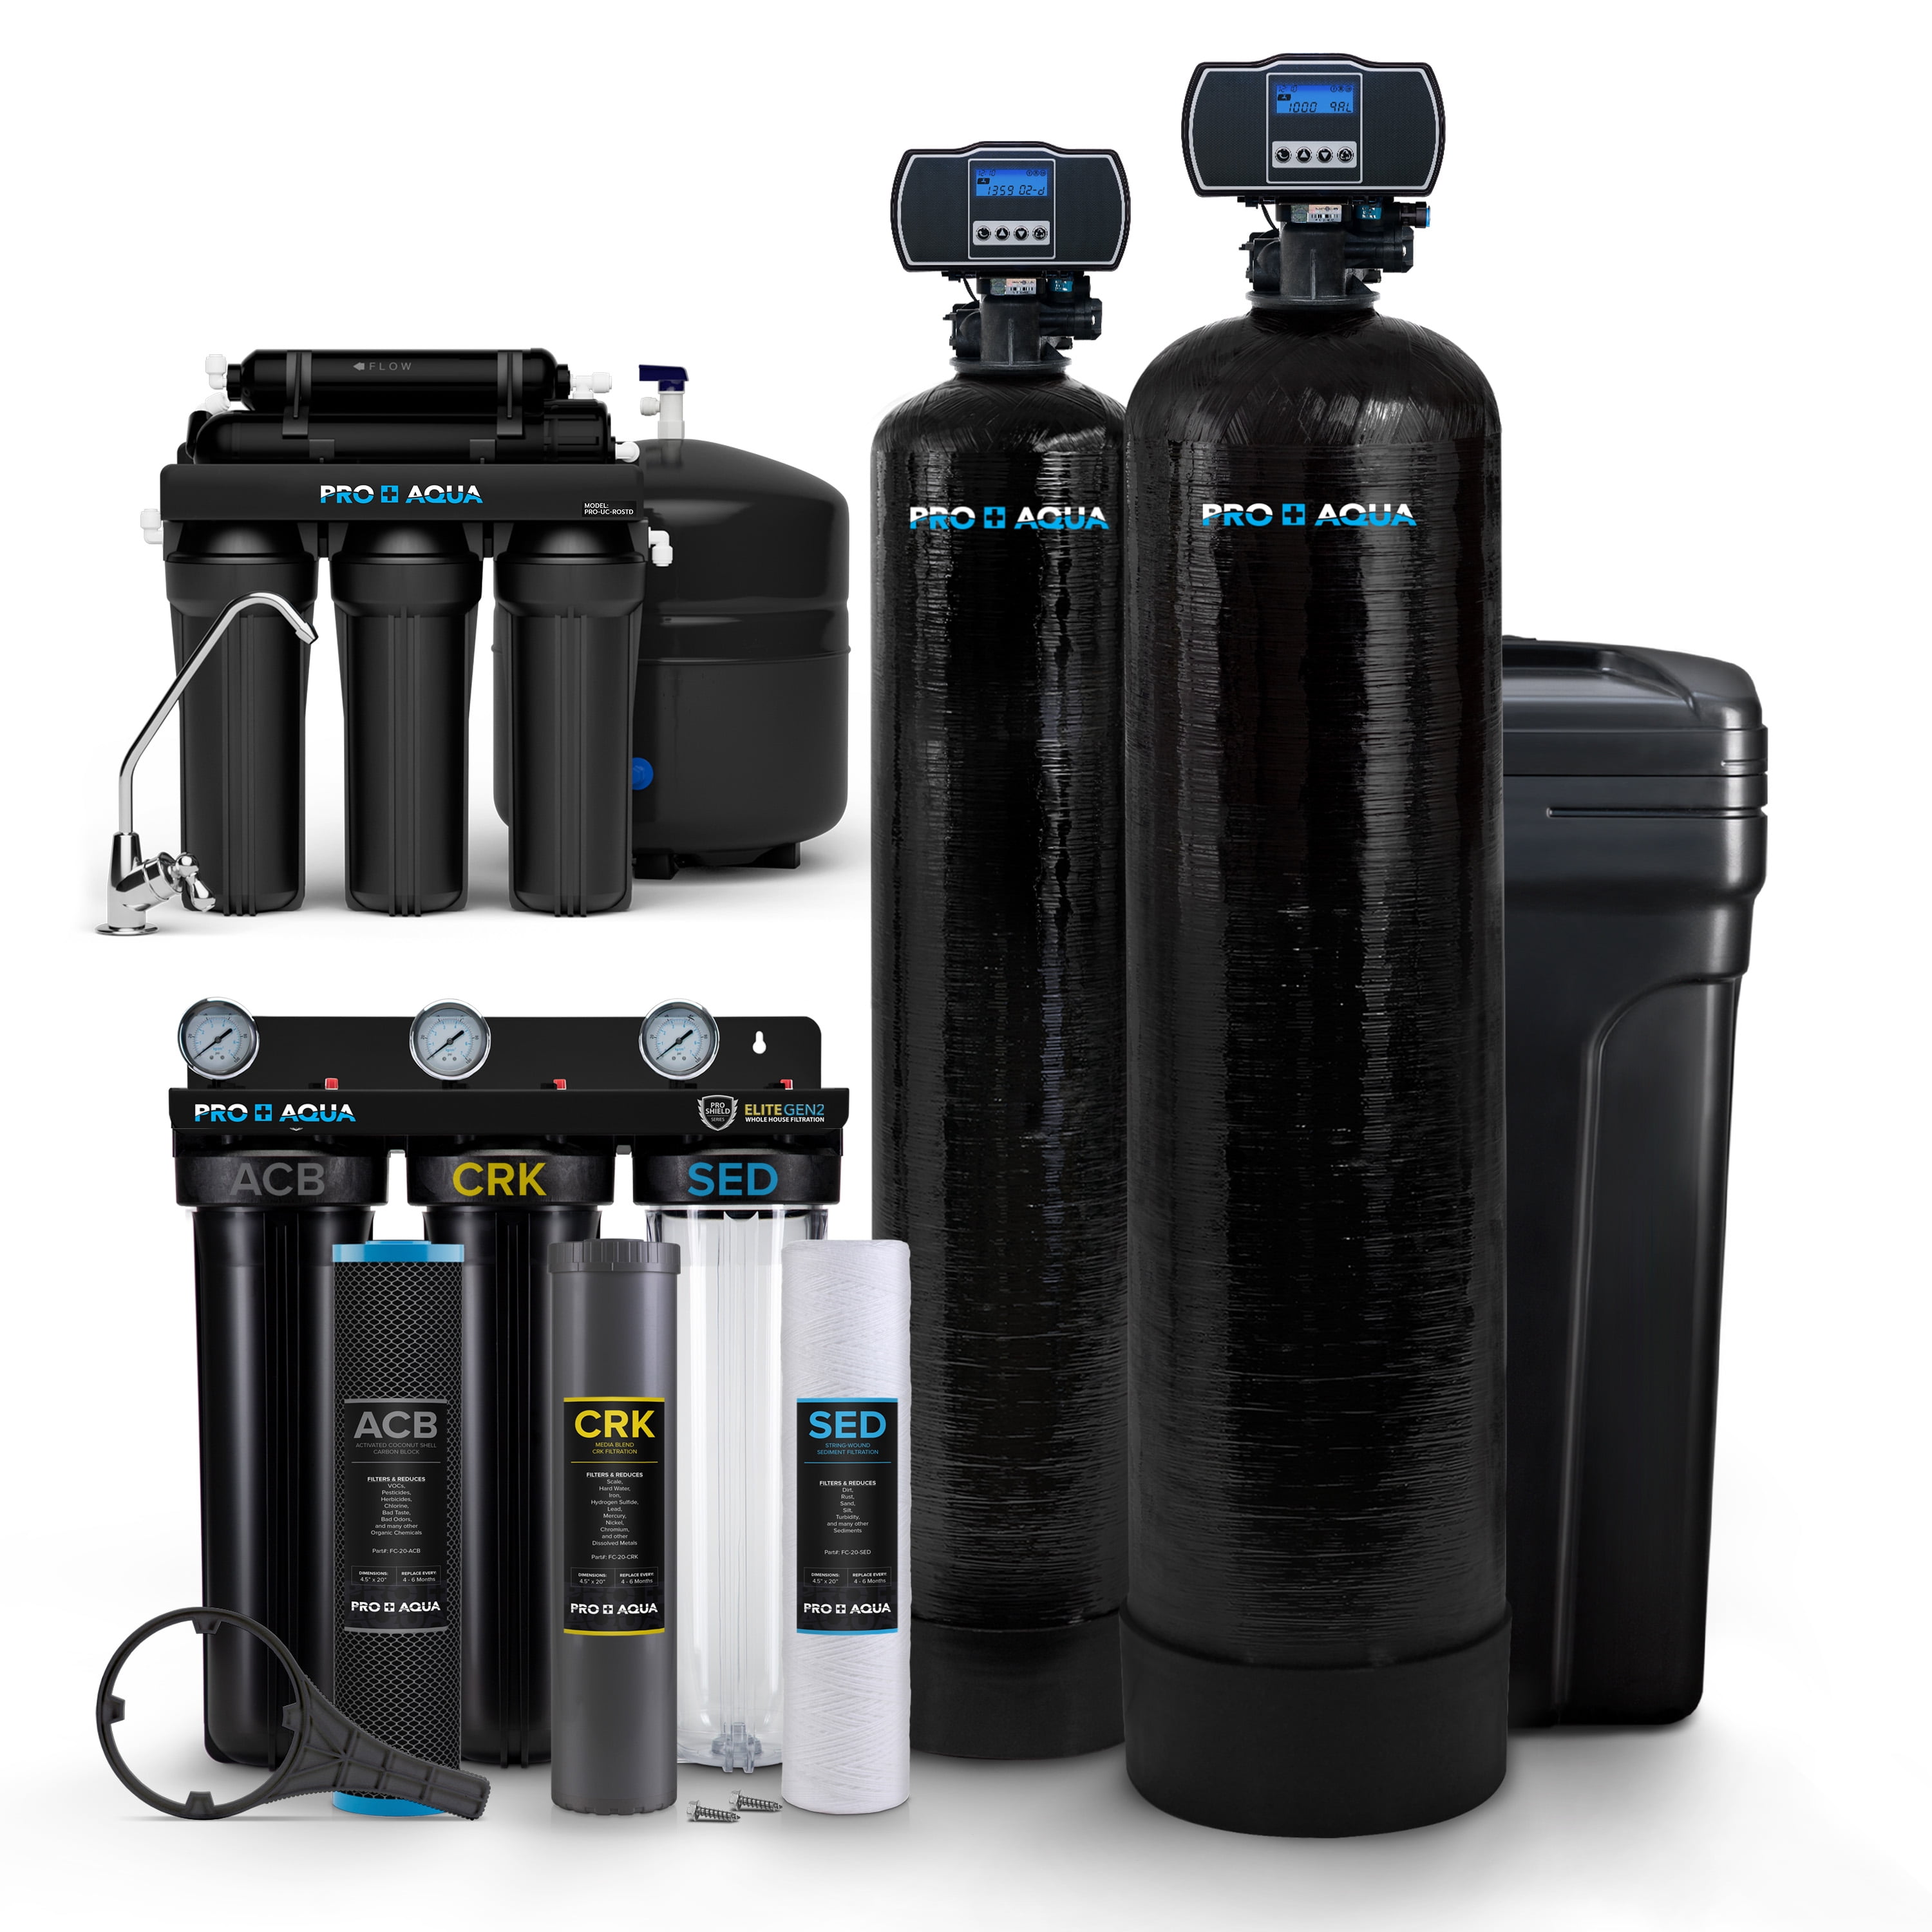 PRO+AQUA ELITE Whole House Well Water Filter System and Water Softener  Bundle - Remove Iron, Sulfur, Sediment, and more 